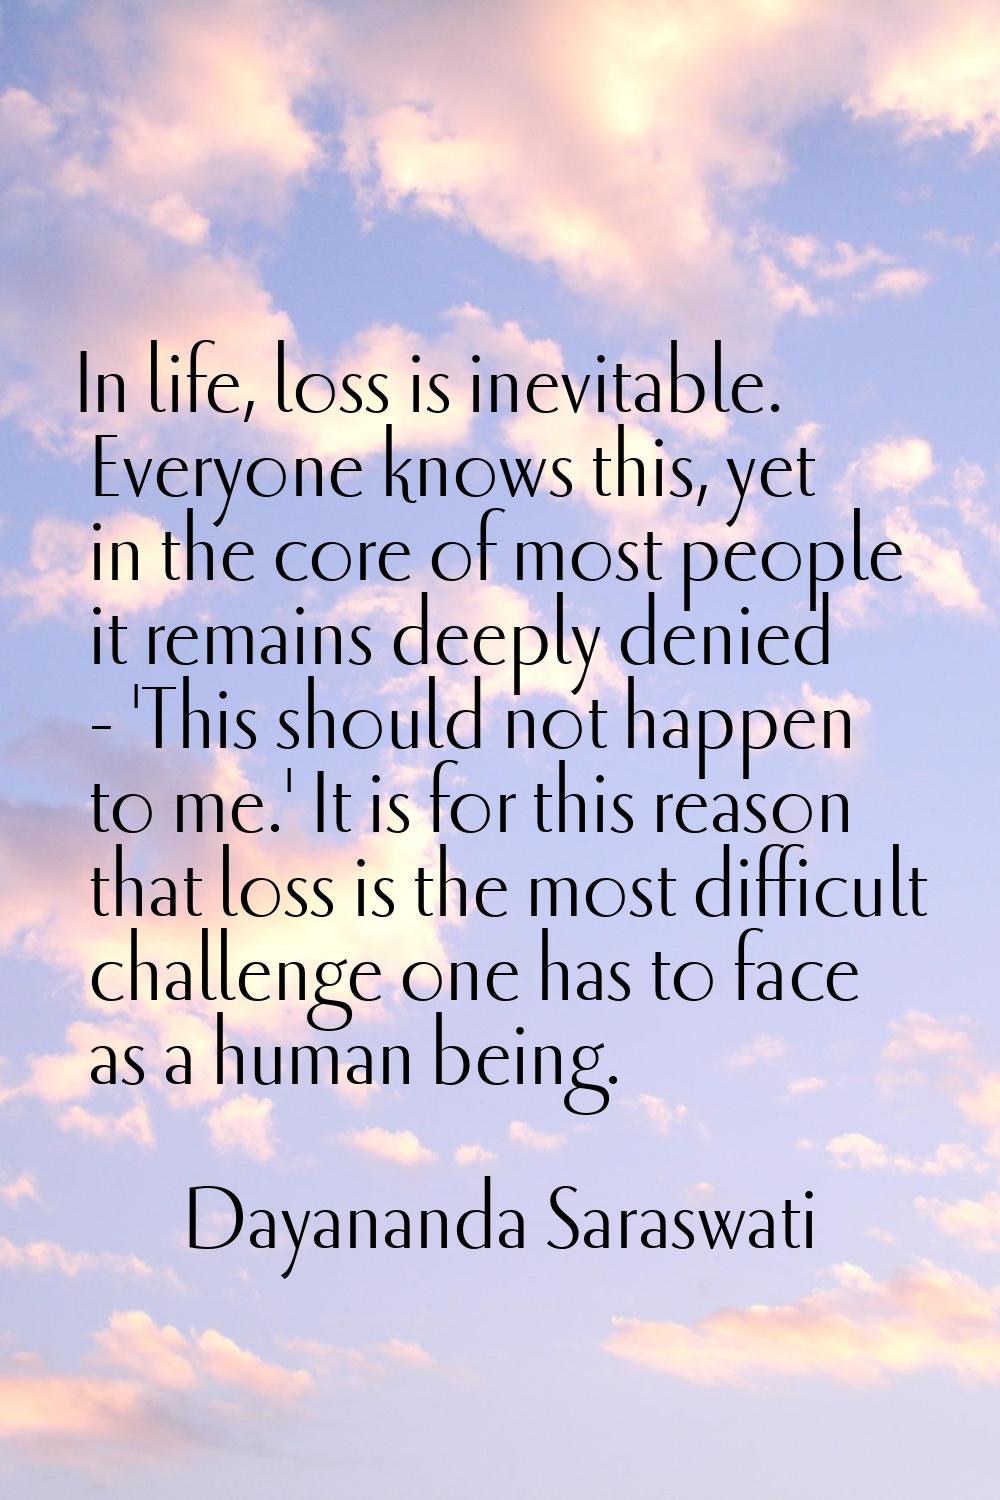 In life, loss is inevitable. Everyone knows this, yet in the core of most people it remains deeply 